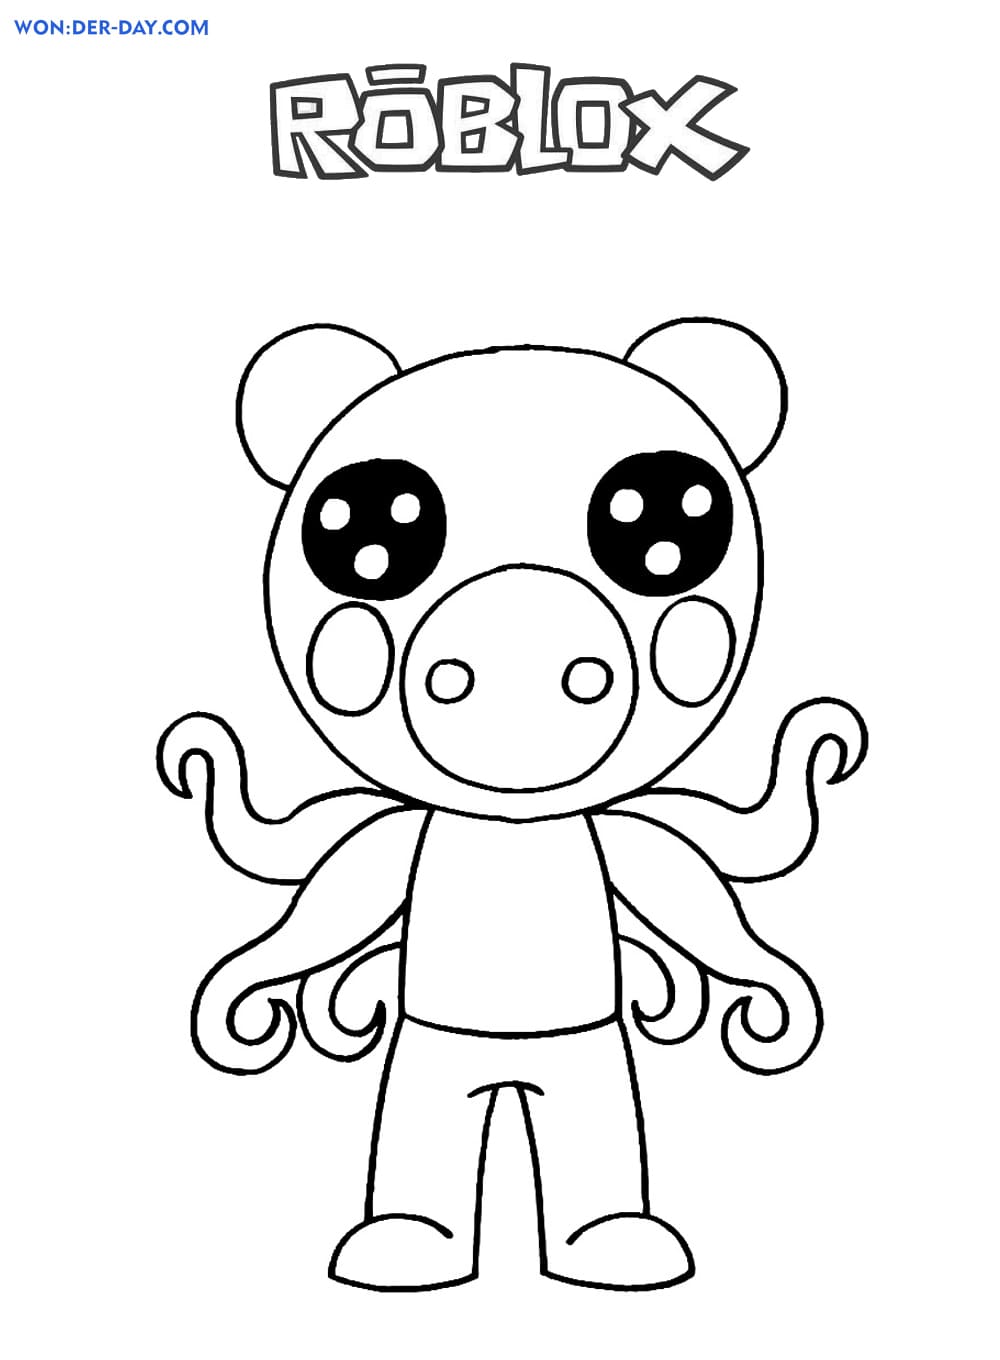 piggy roblox coloring pages wonder day coloring pages